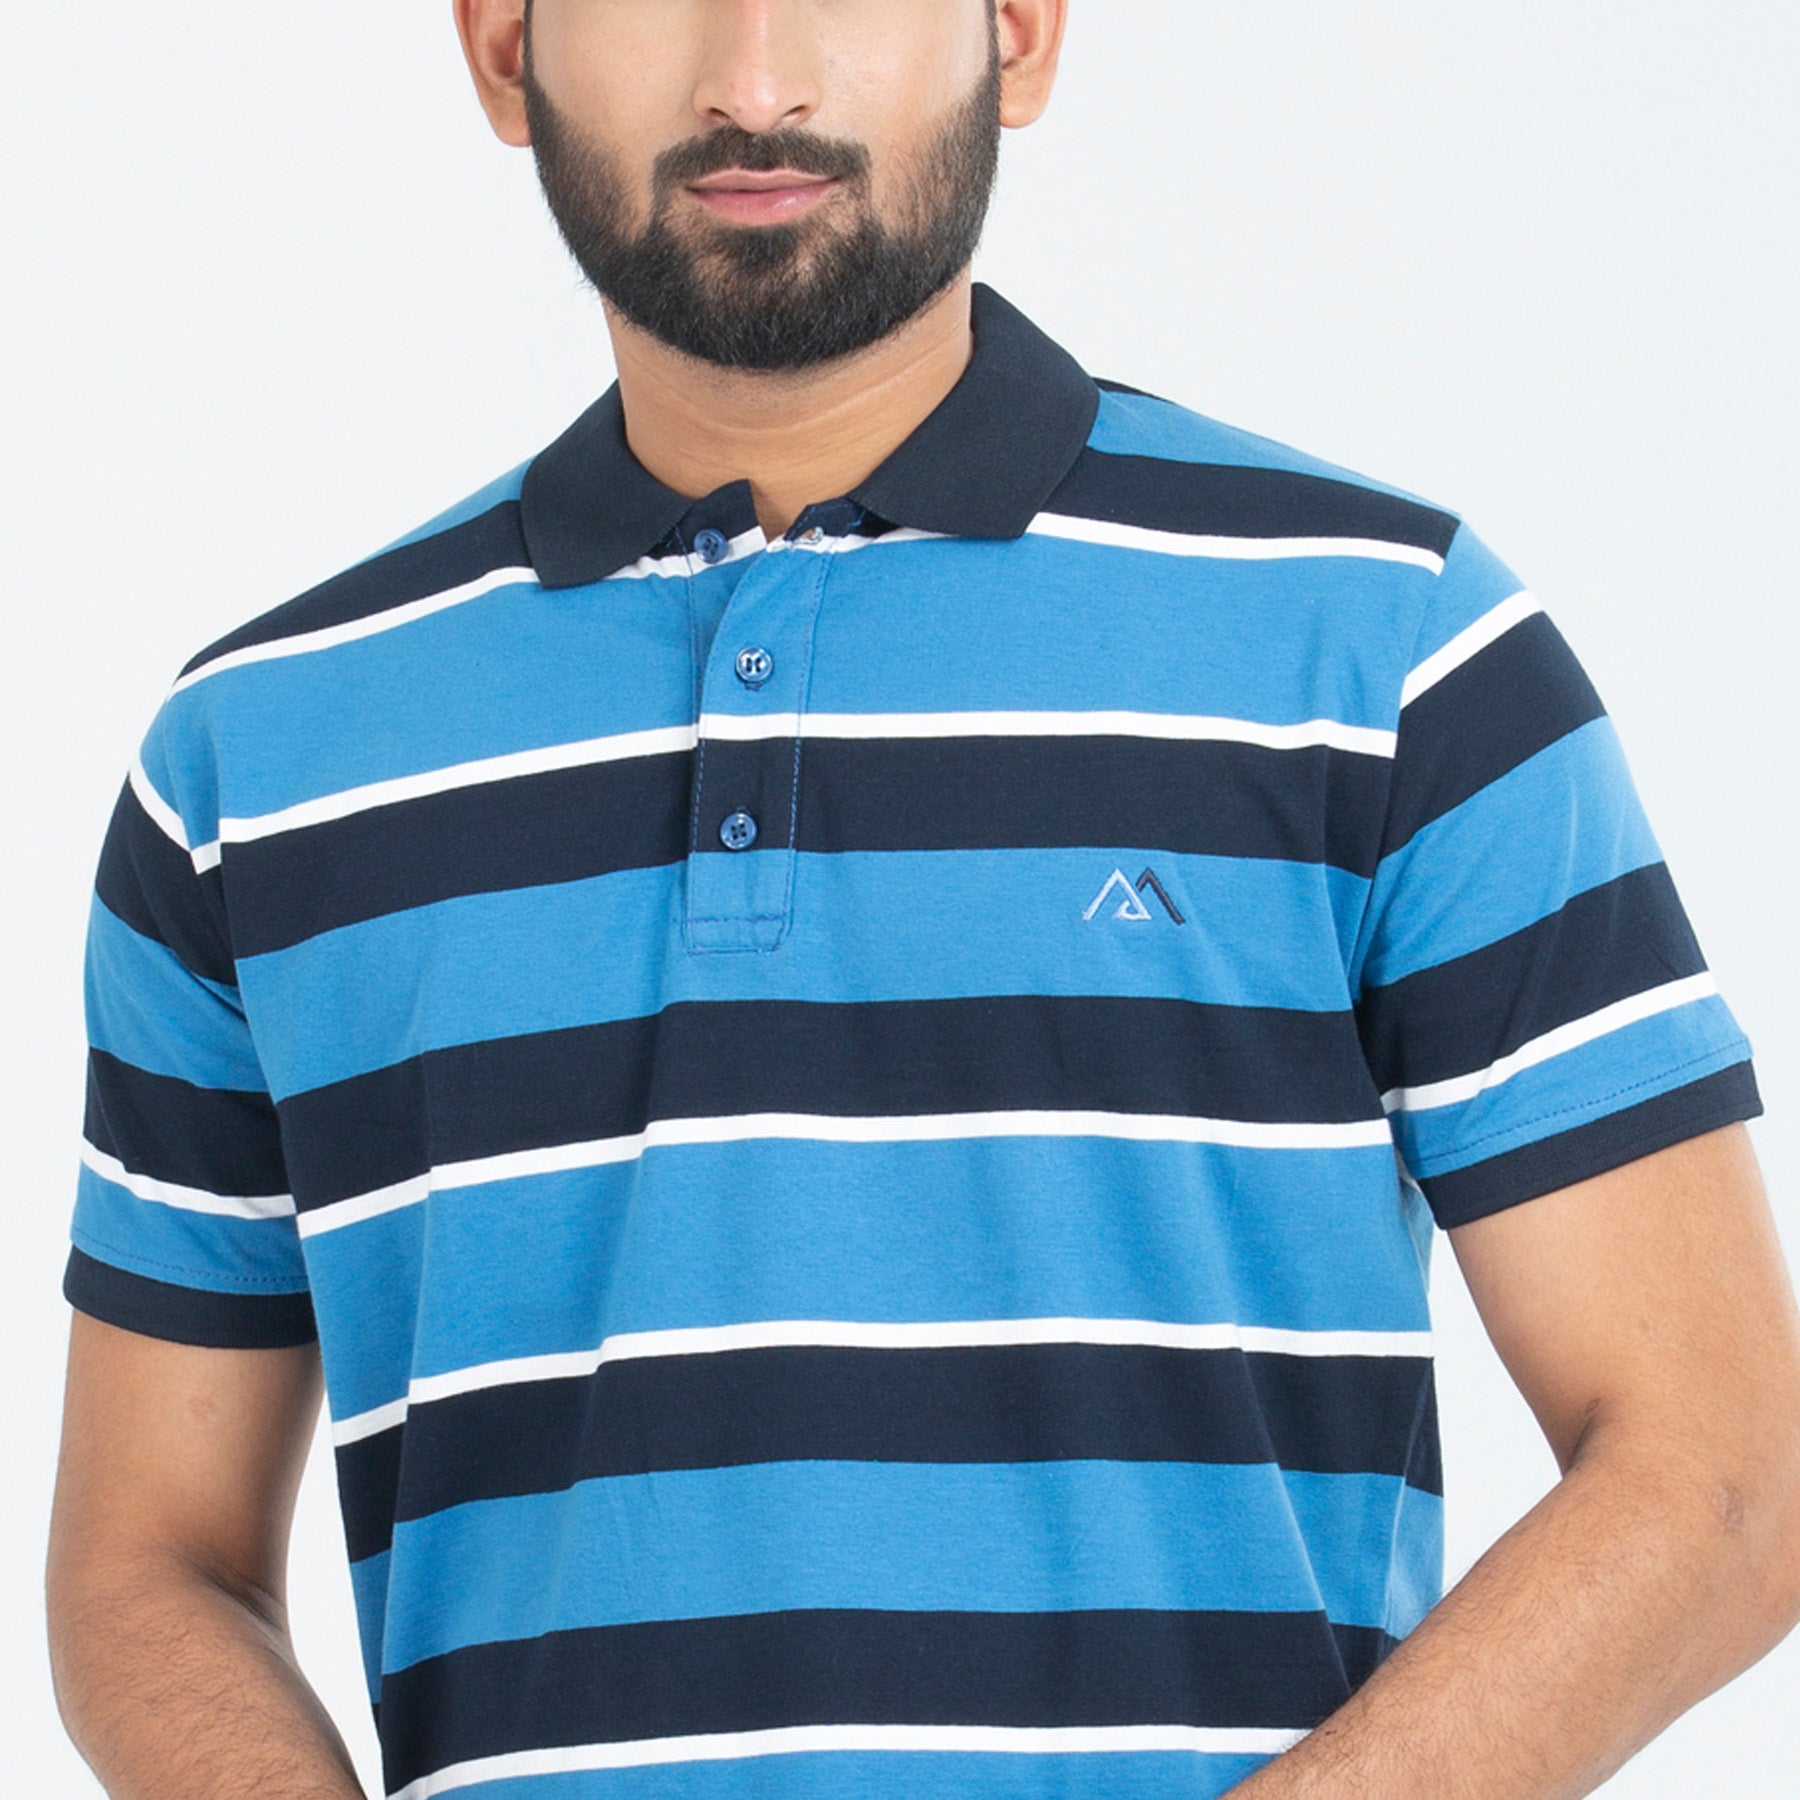  View details for Polo Shirt for Men | Blue Stripe Polo Polo Shirt for Men | Blue Stripe Polo